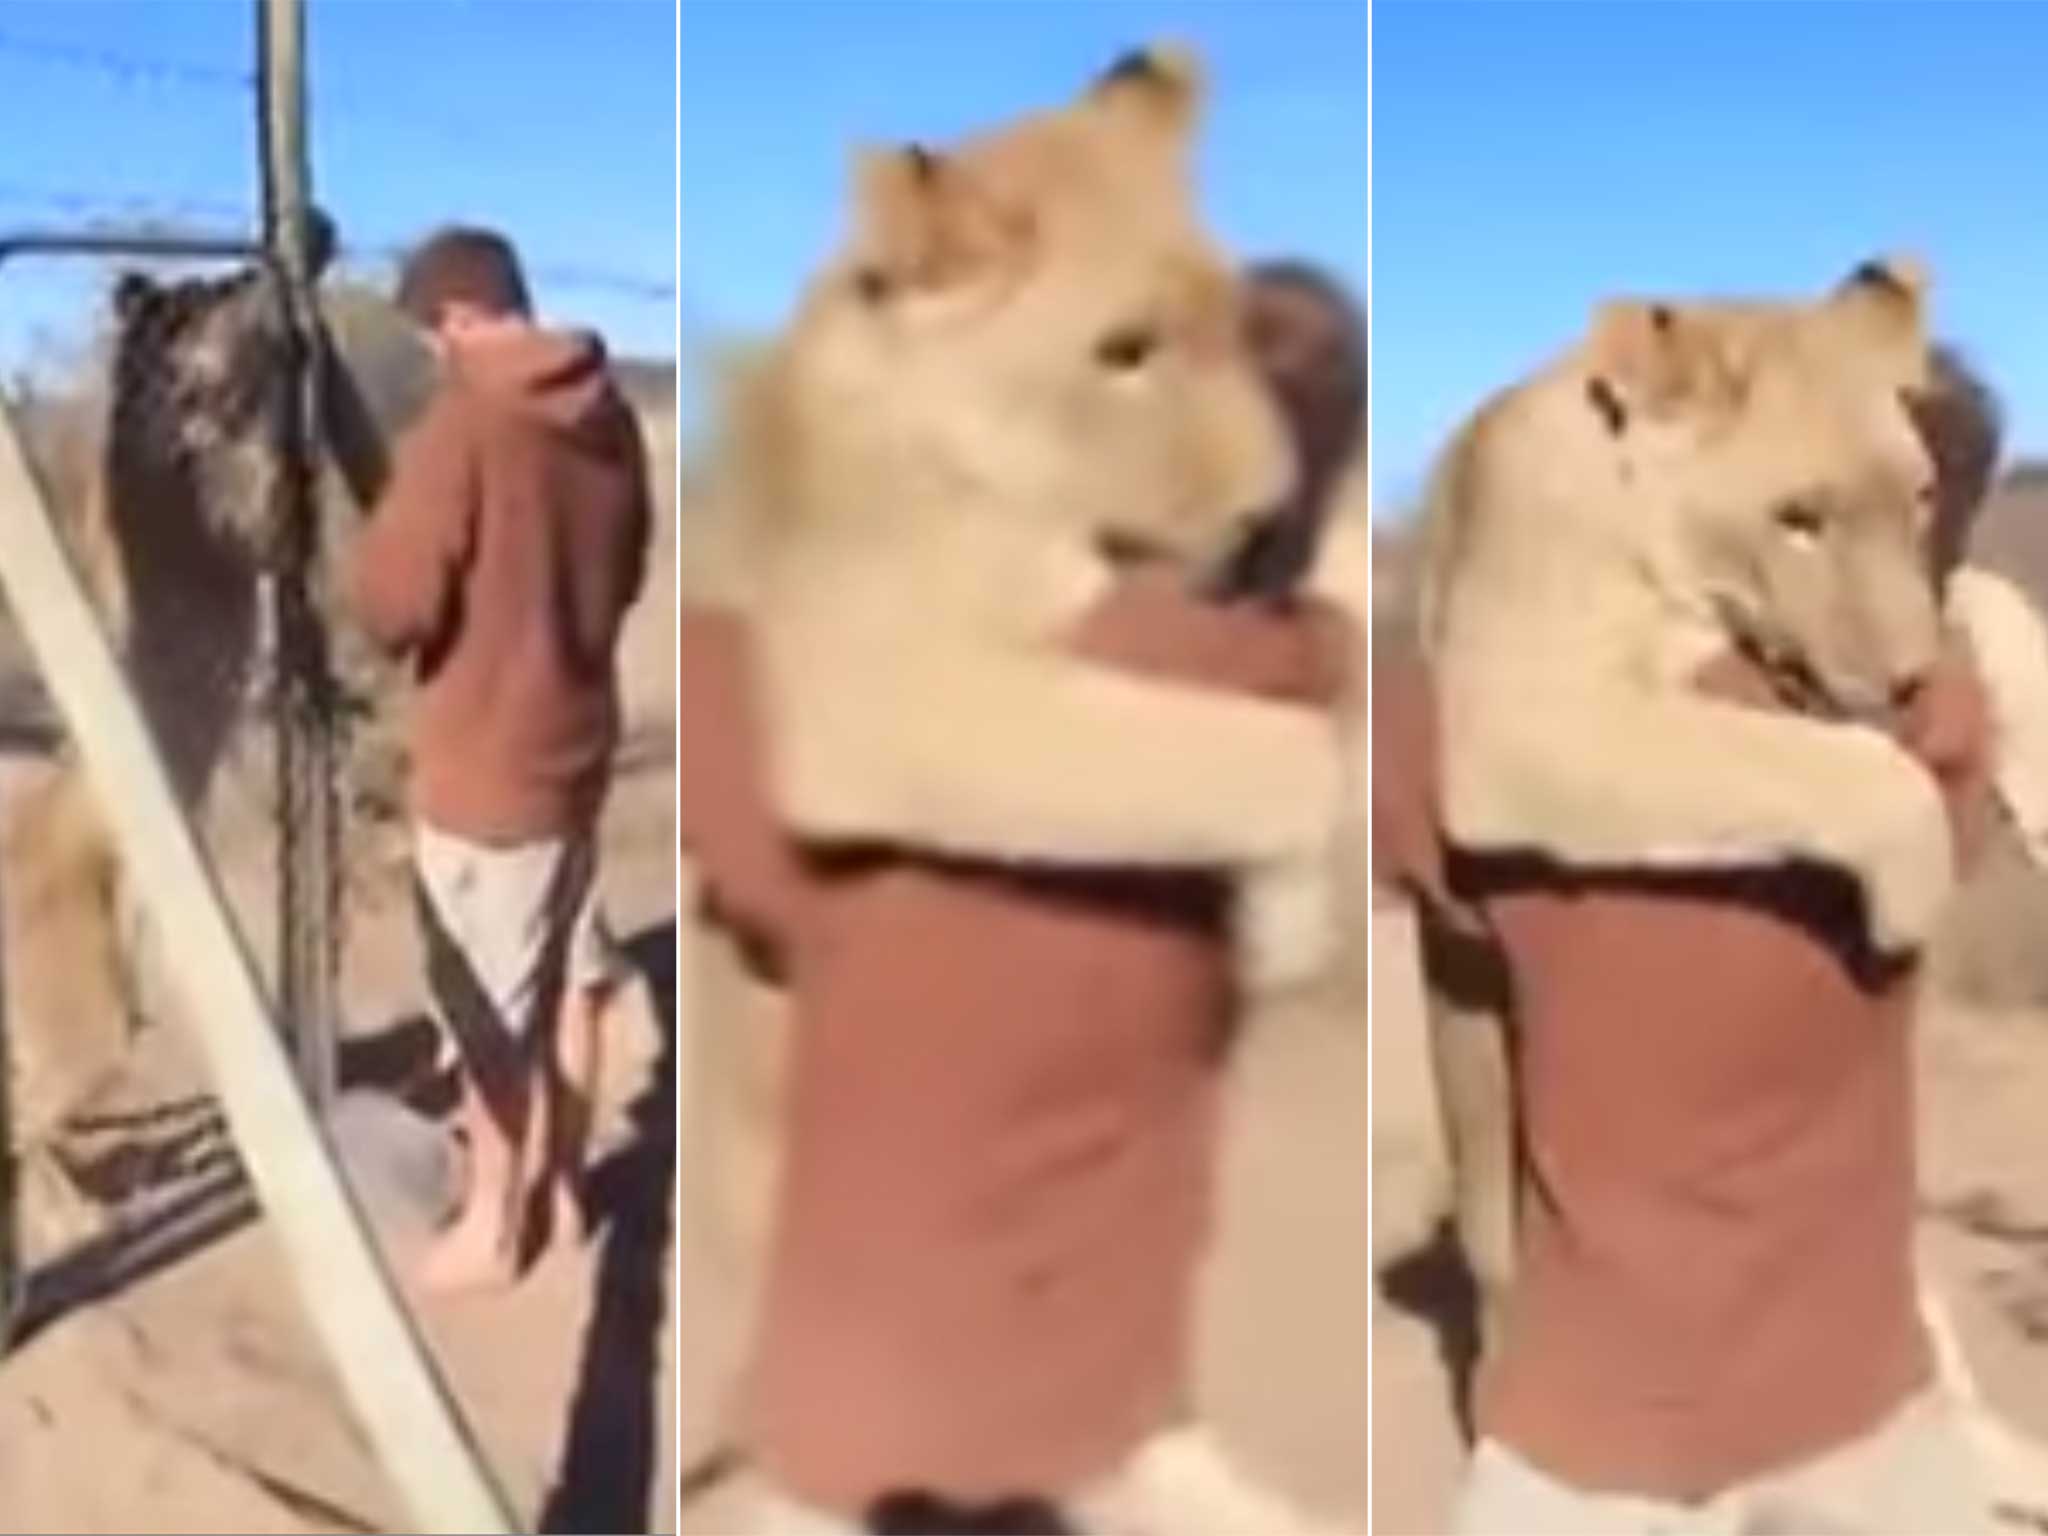 Watch the lion jump into Valentin's arms